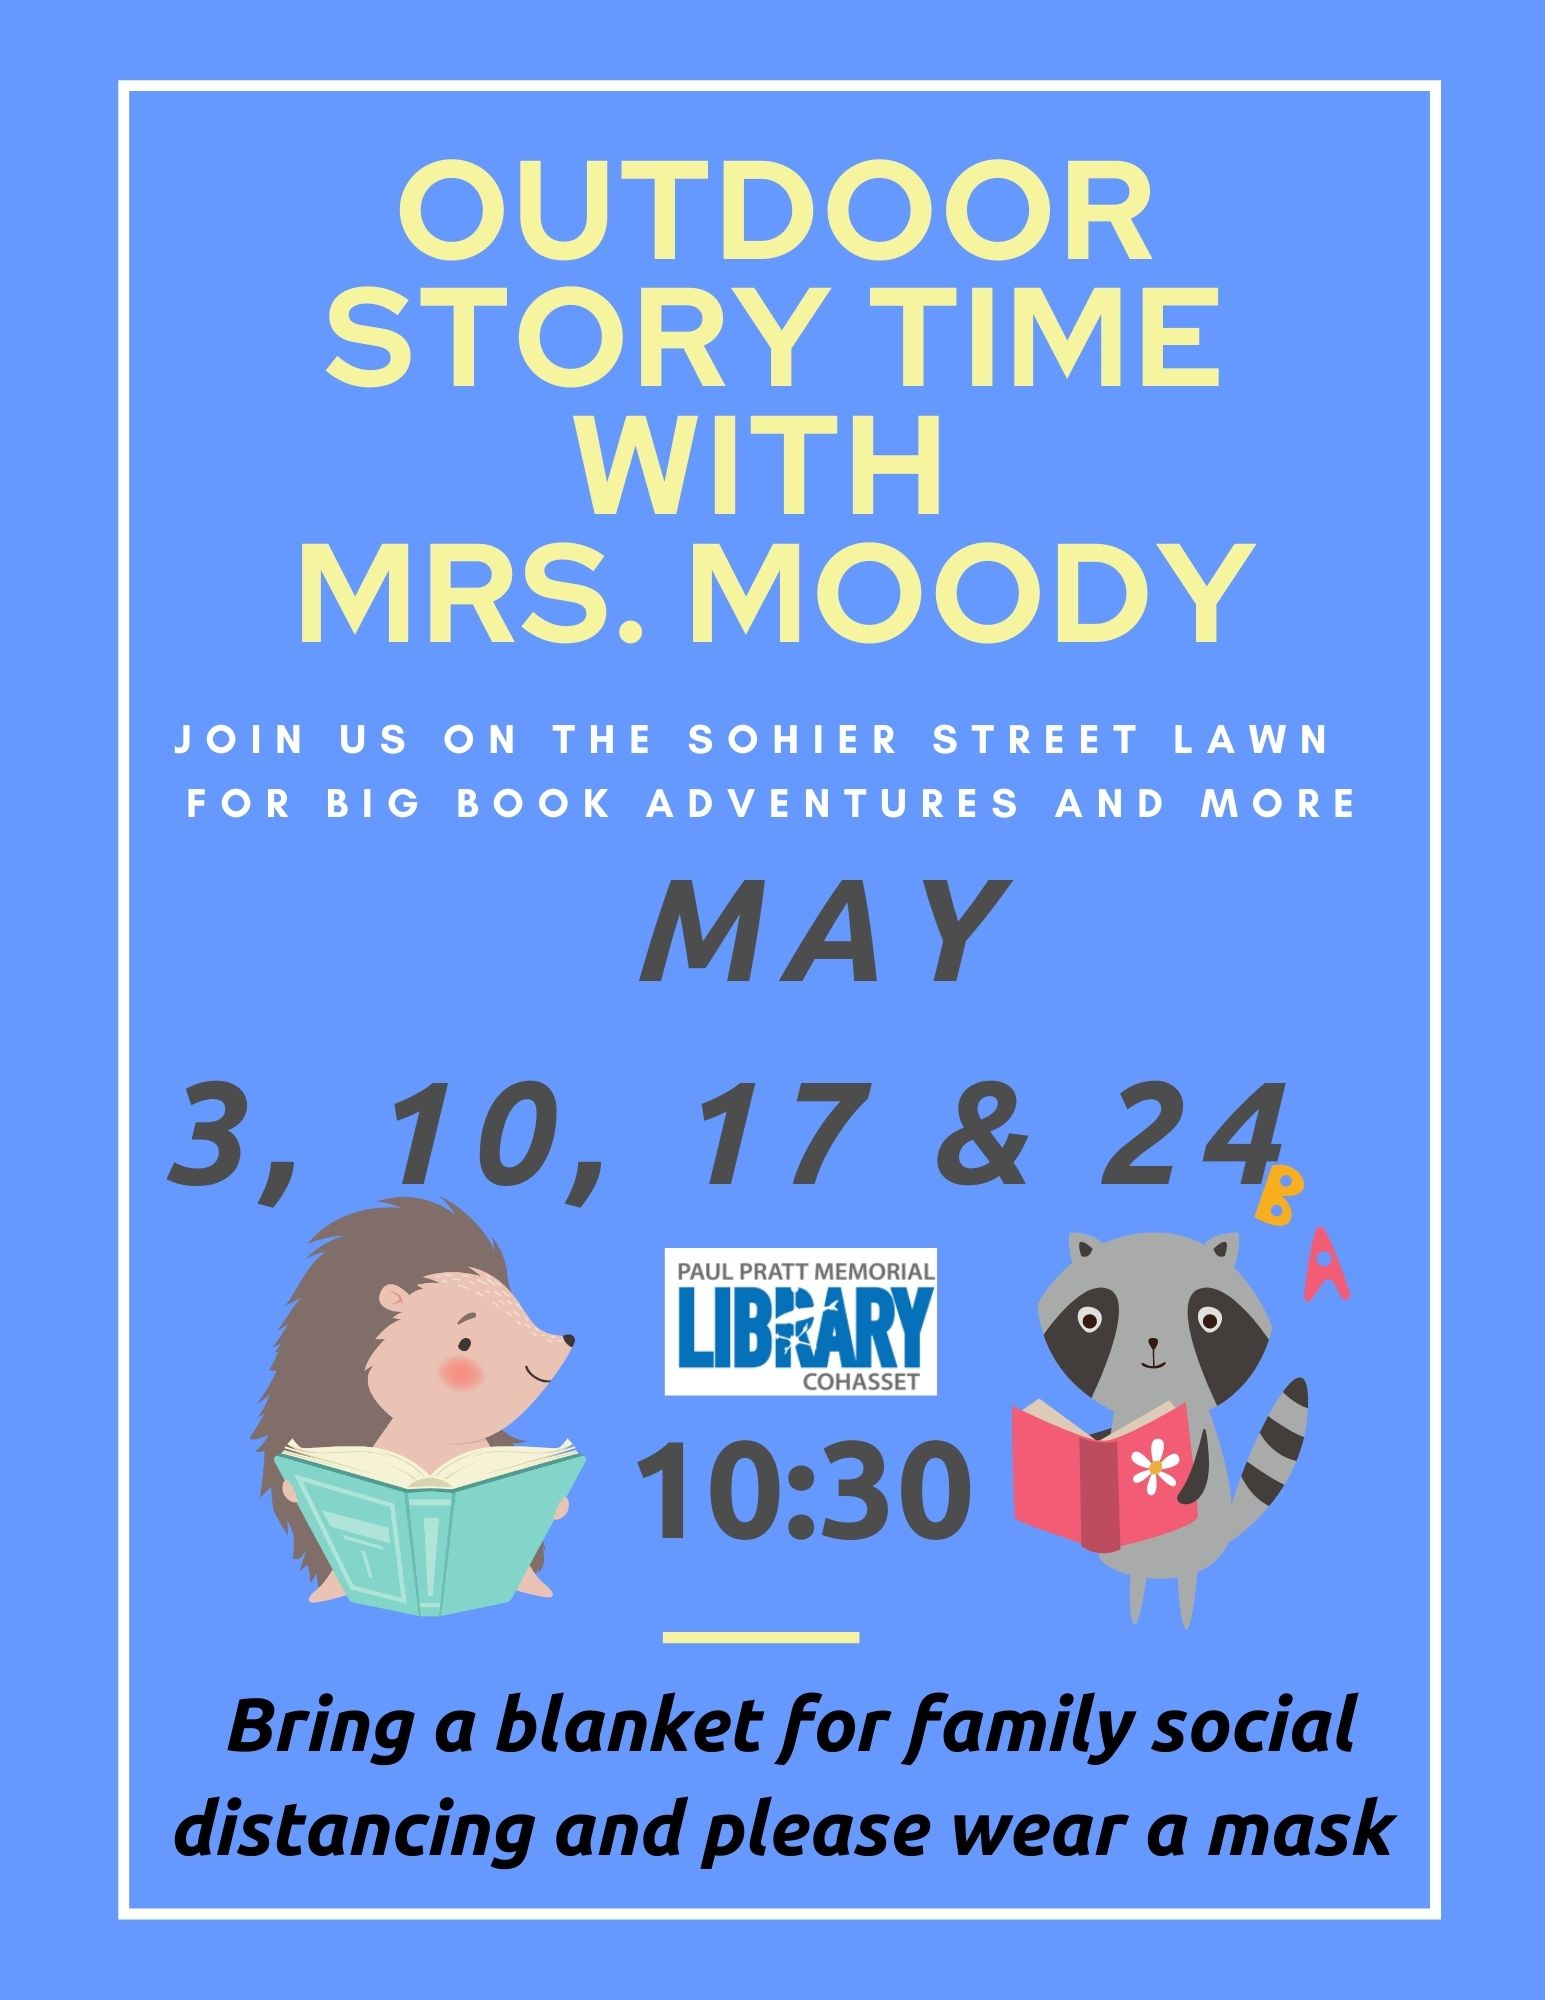 outdoor storytime with Mrs. Moody on the Sohier St. lawn